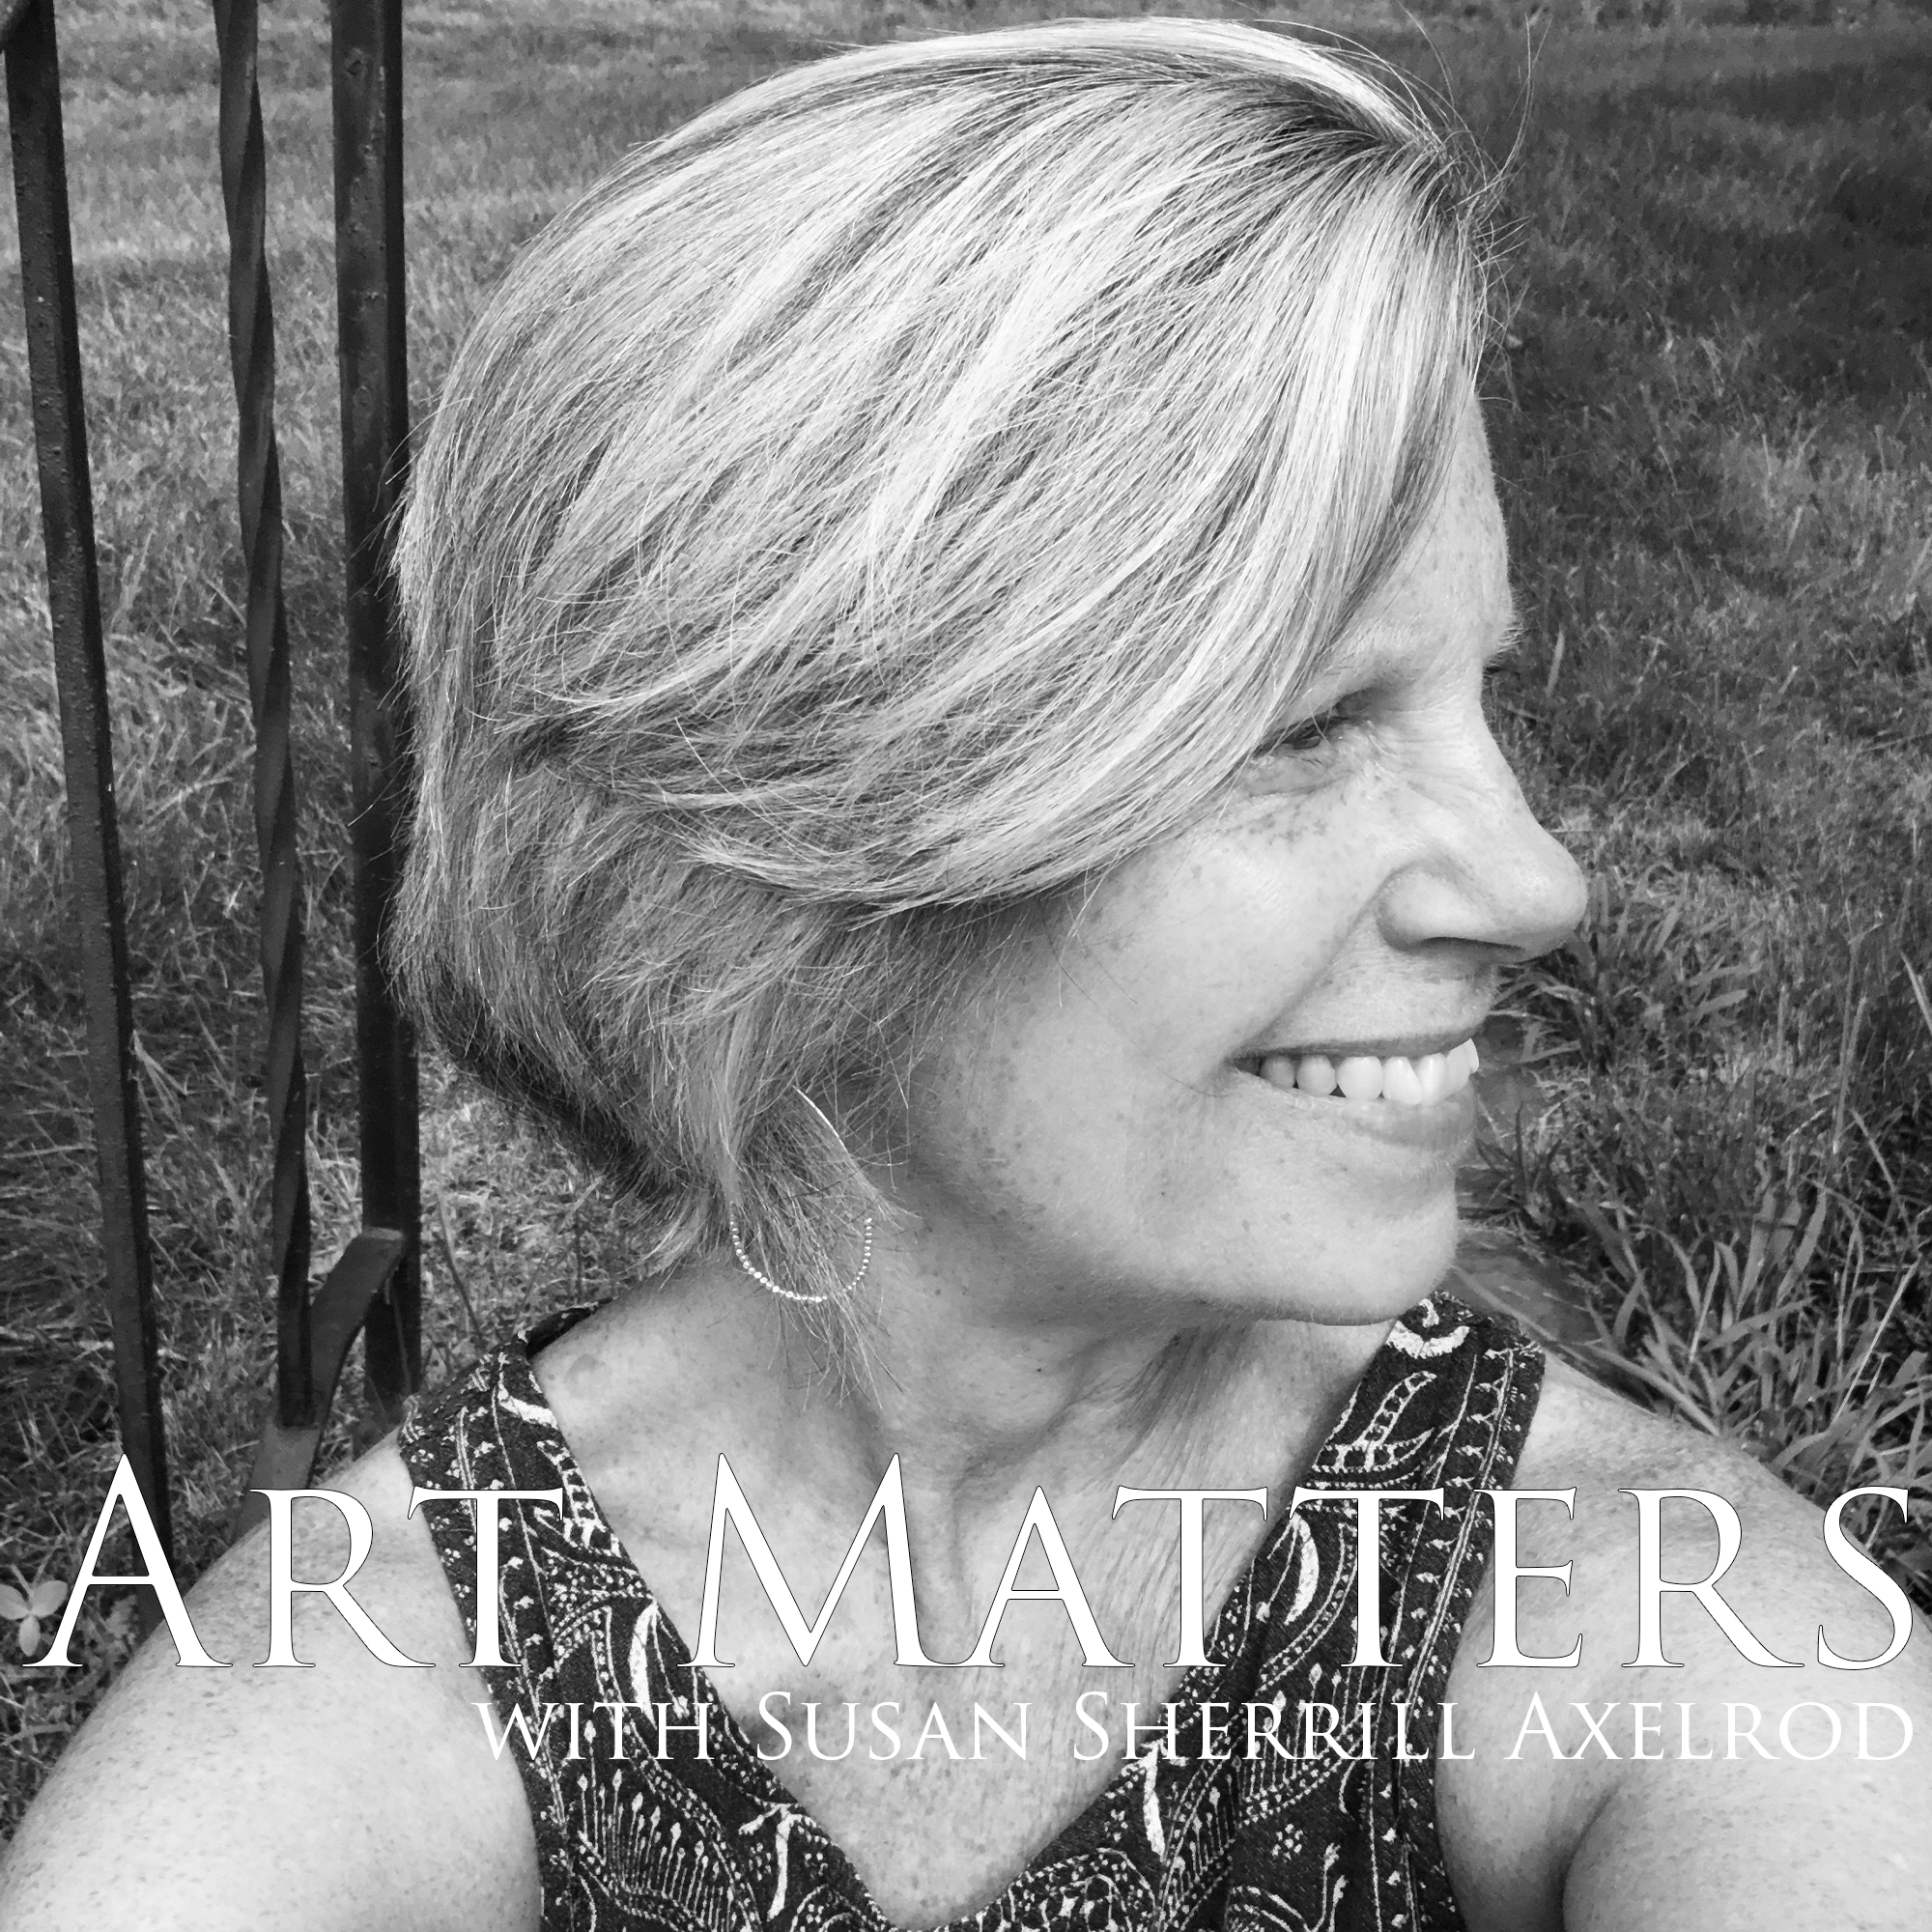 Susan Sherrill Axelrod, arts writer and editor of Art Matters